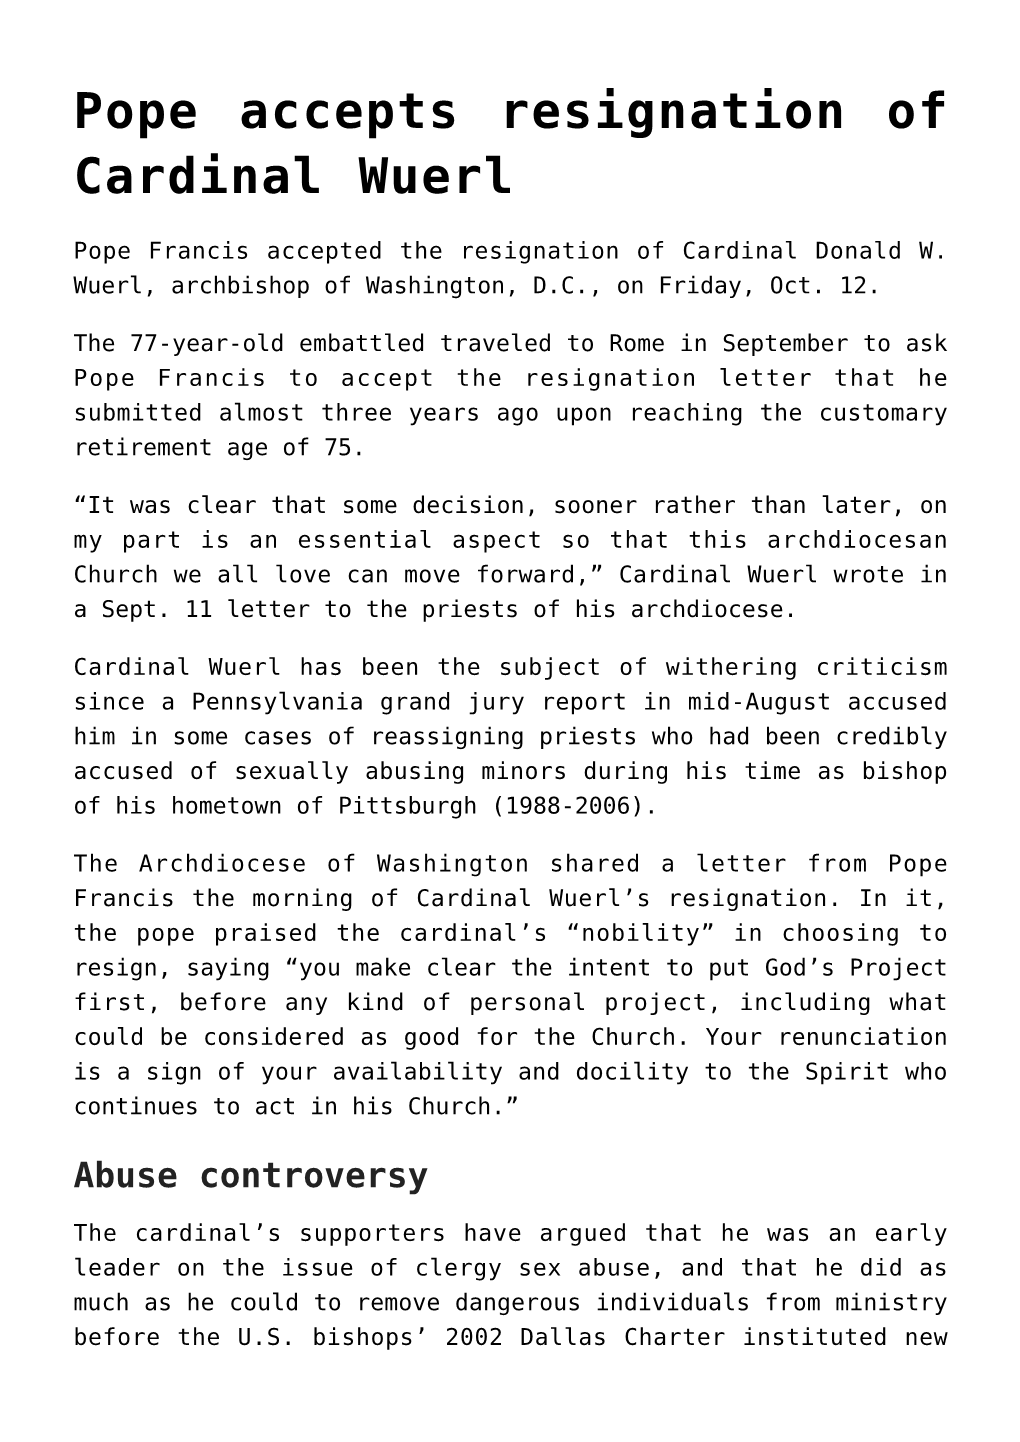 Pope Accepts Resignation of Cardinal Wuerl